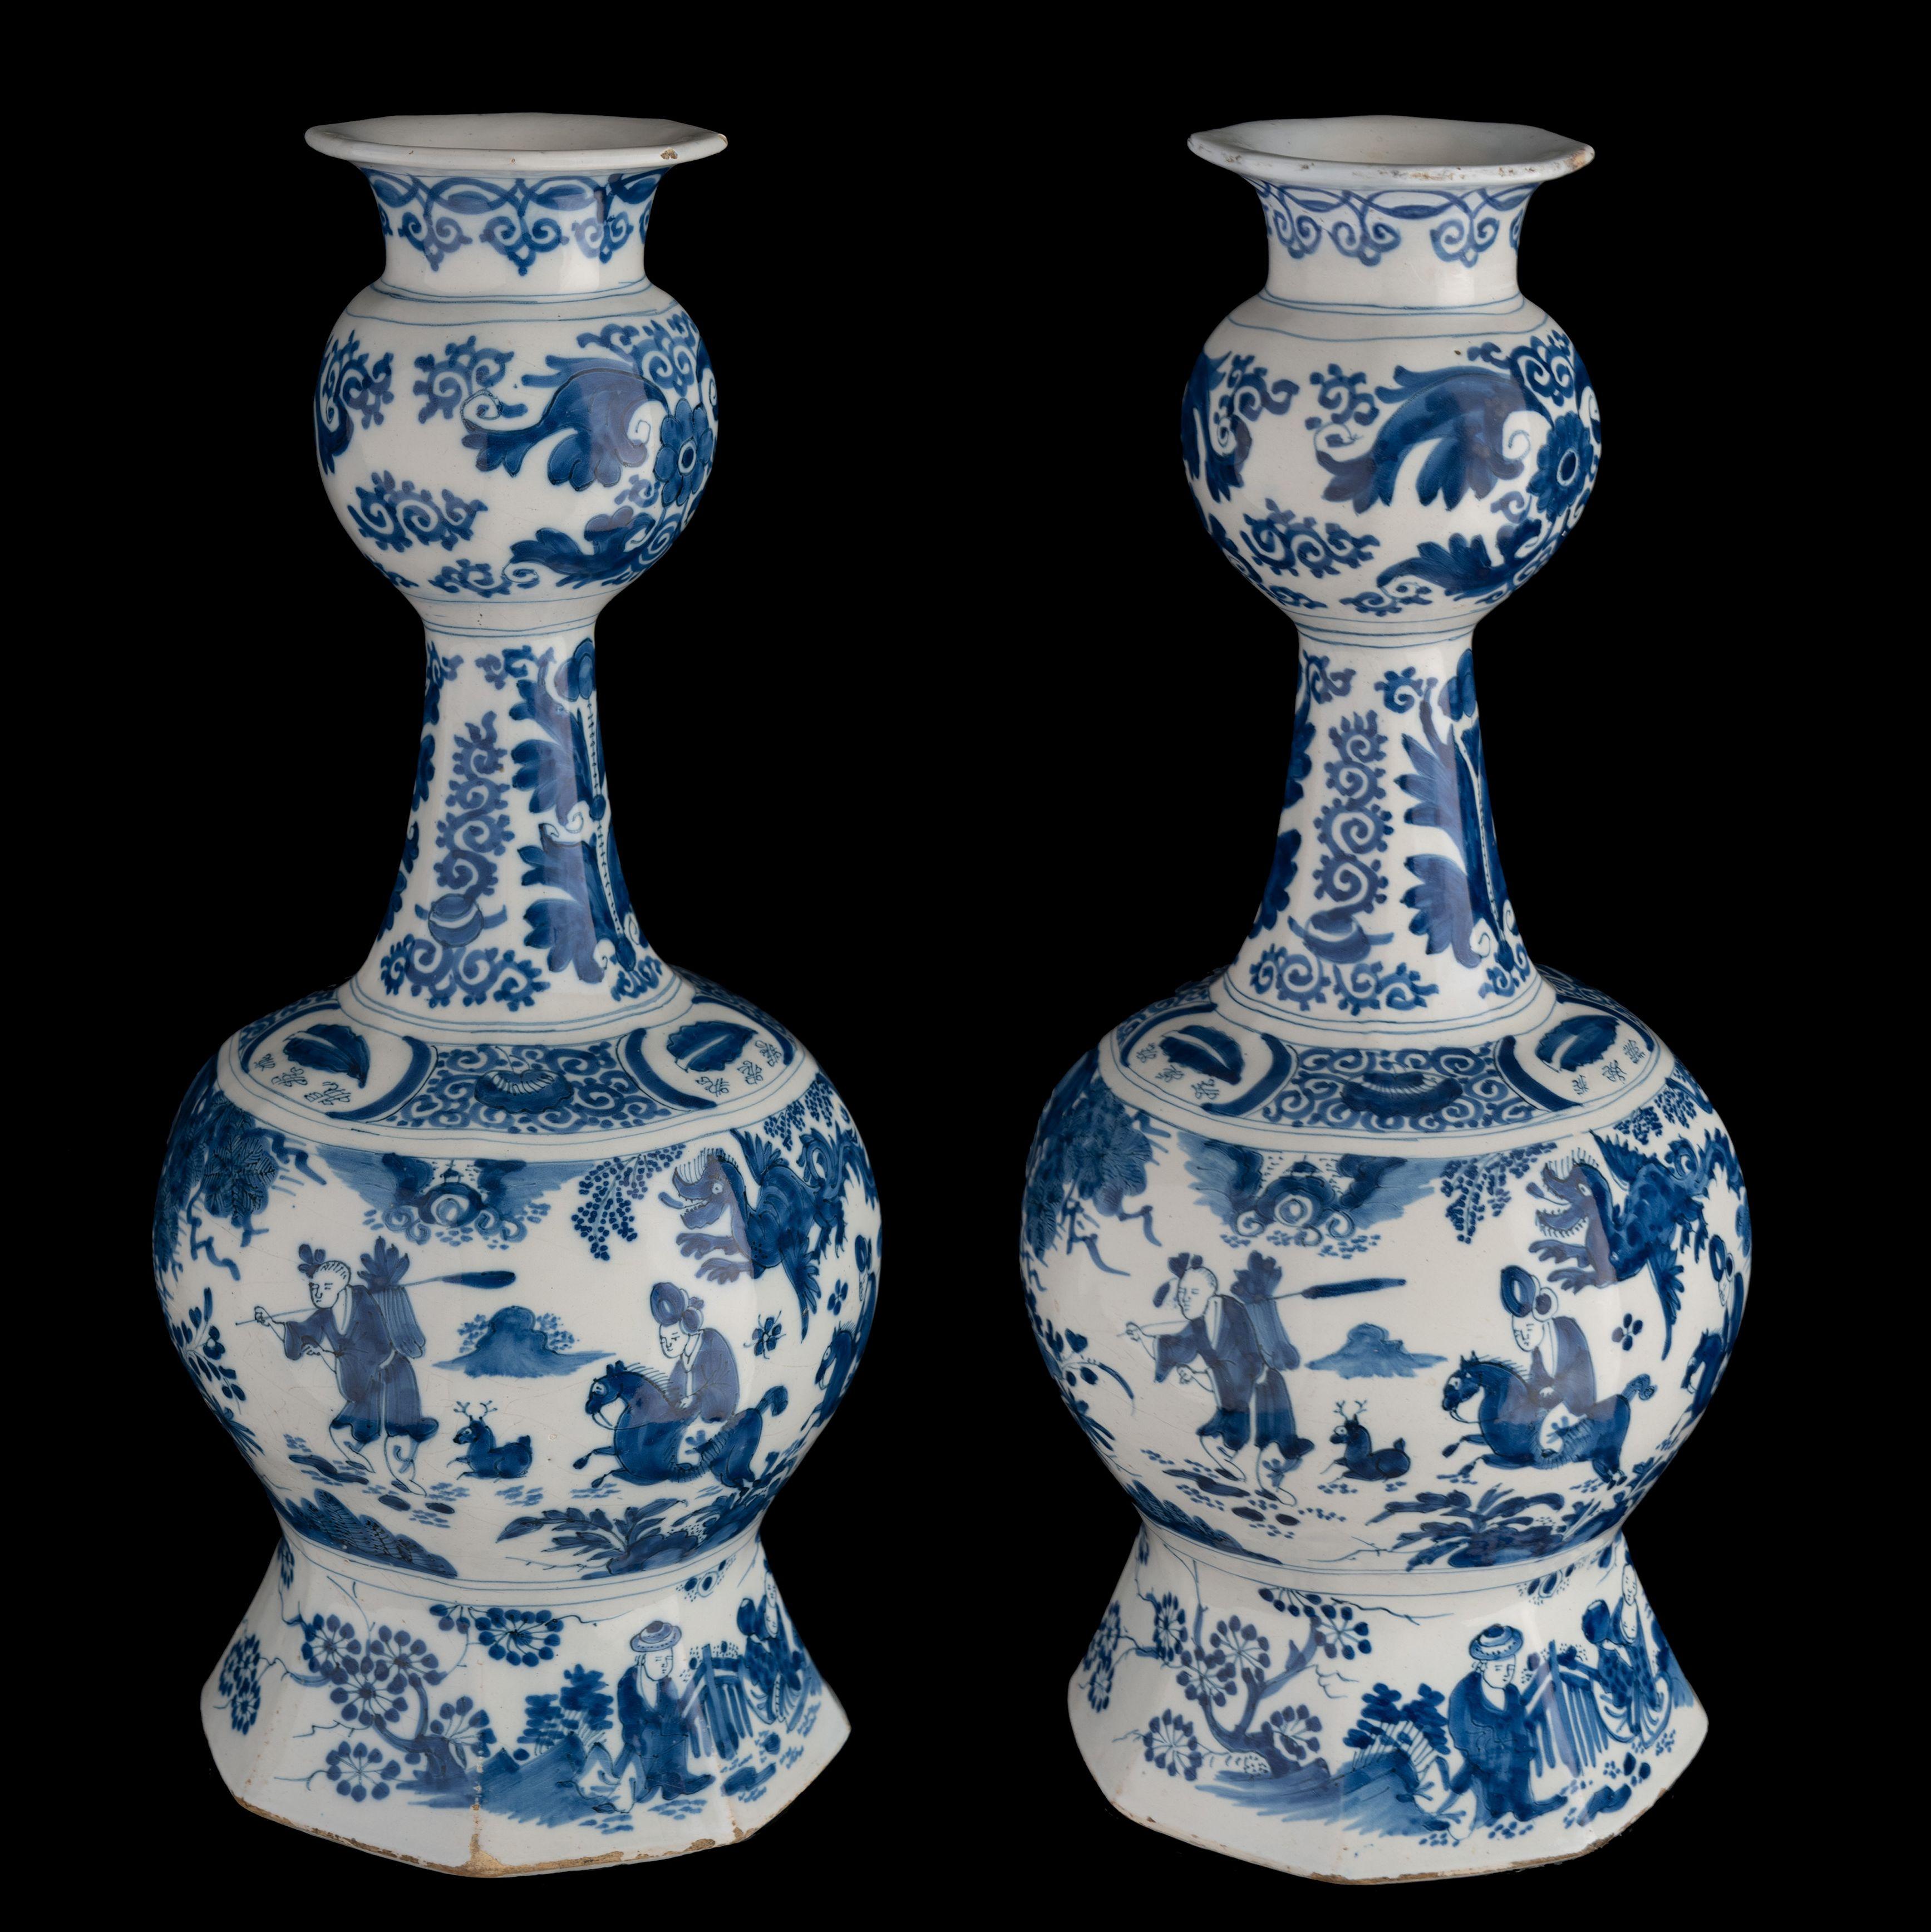 Pair of blue and white garlic-head chinoiserie bottle vases. Delft, 1680-1690 

The octagonal garlic-head vases stand on a wide, spreading foot and are painted in blue with a chinoiserie decor. An oriental landscape with buildings, a Chinese